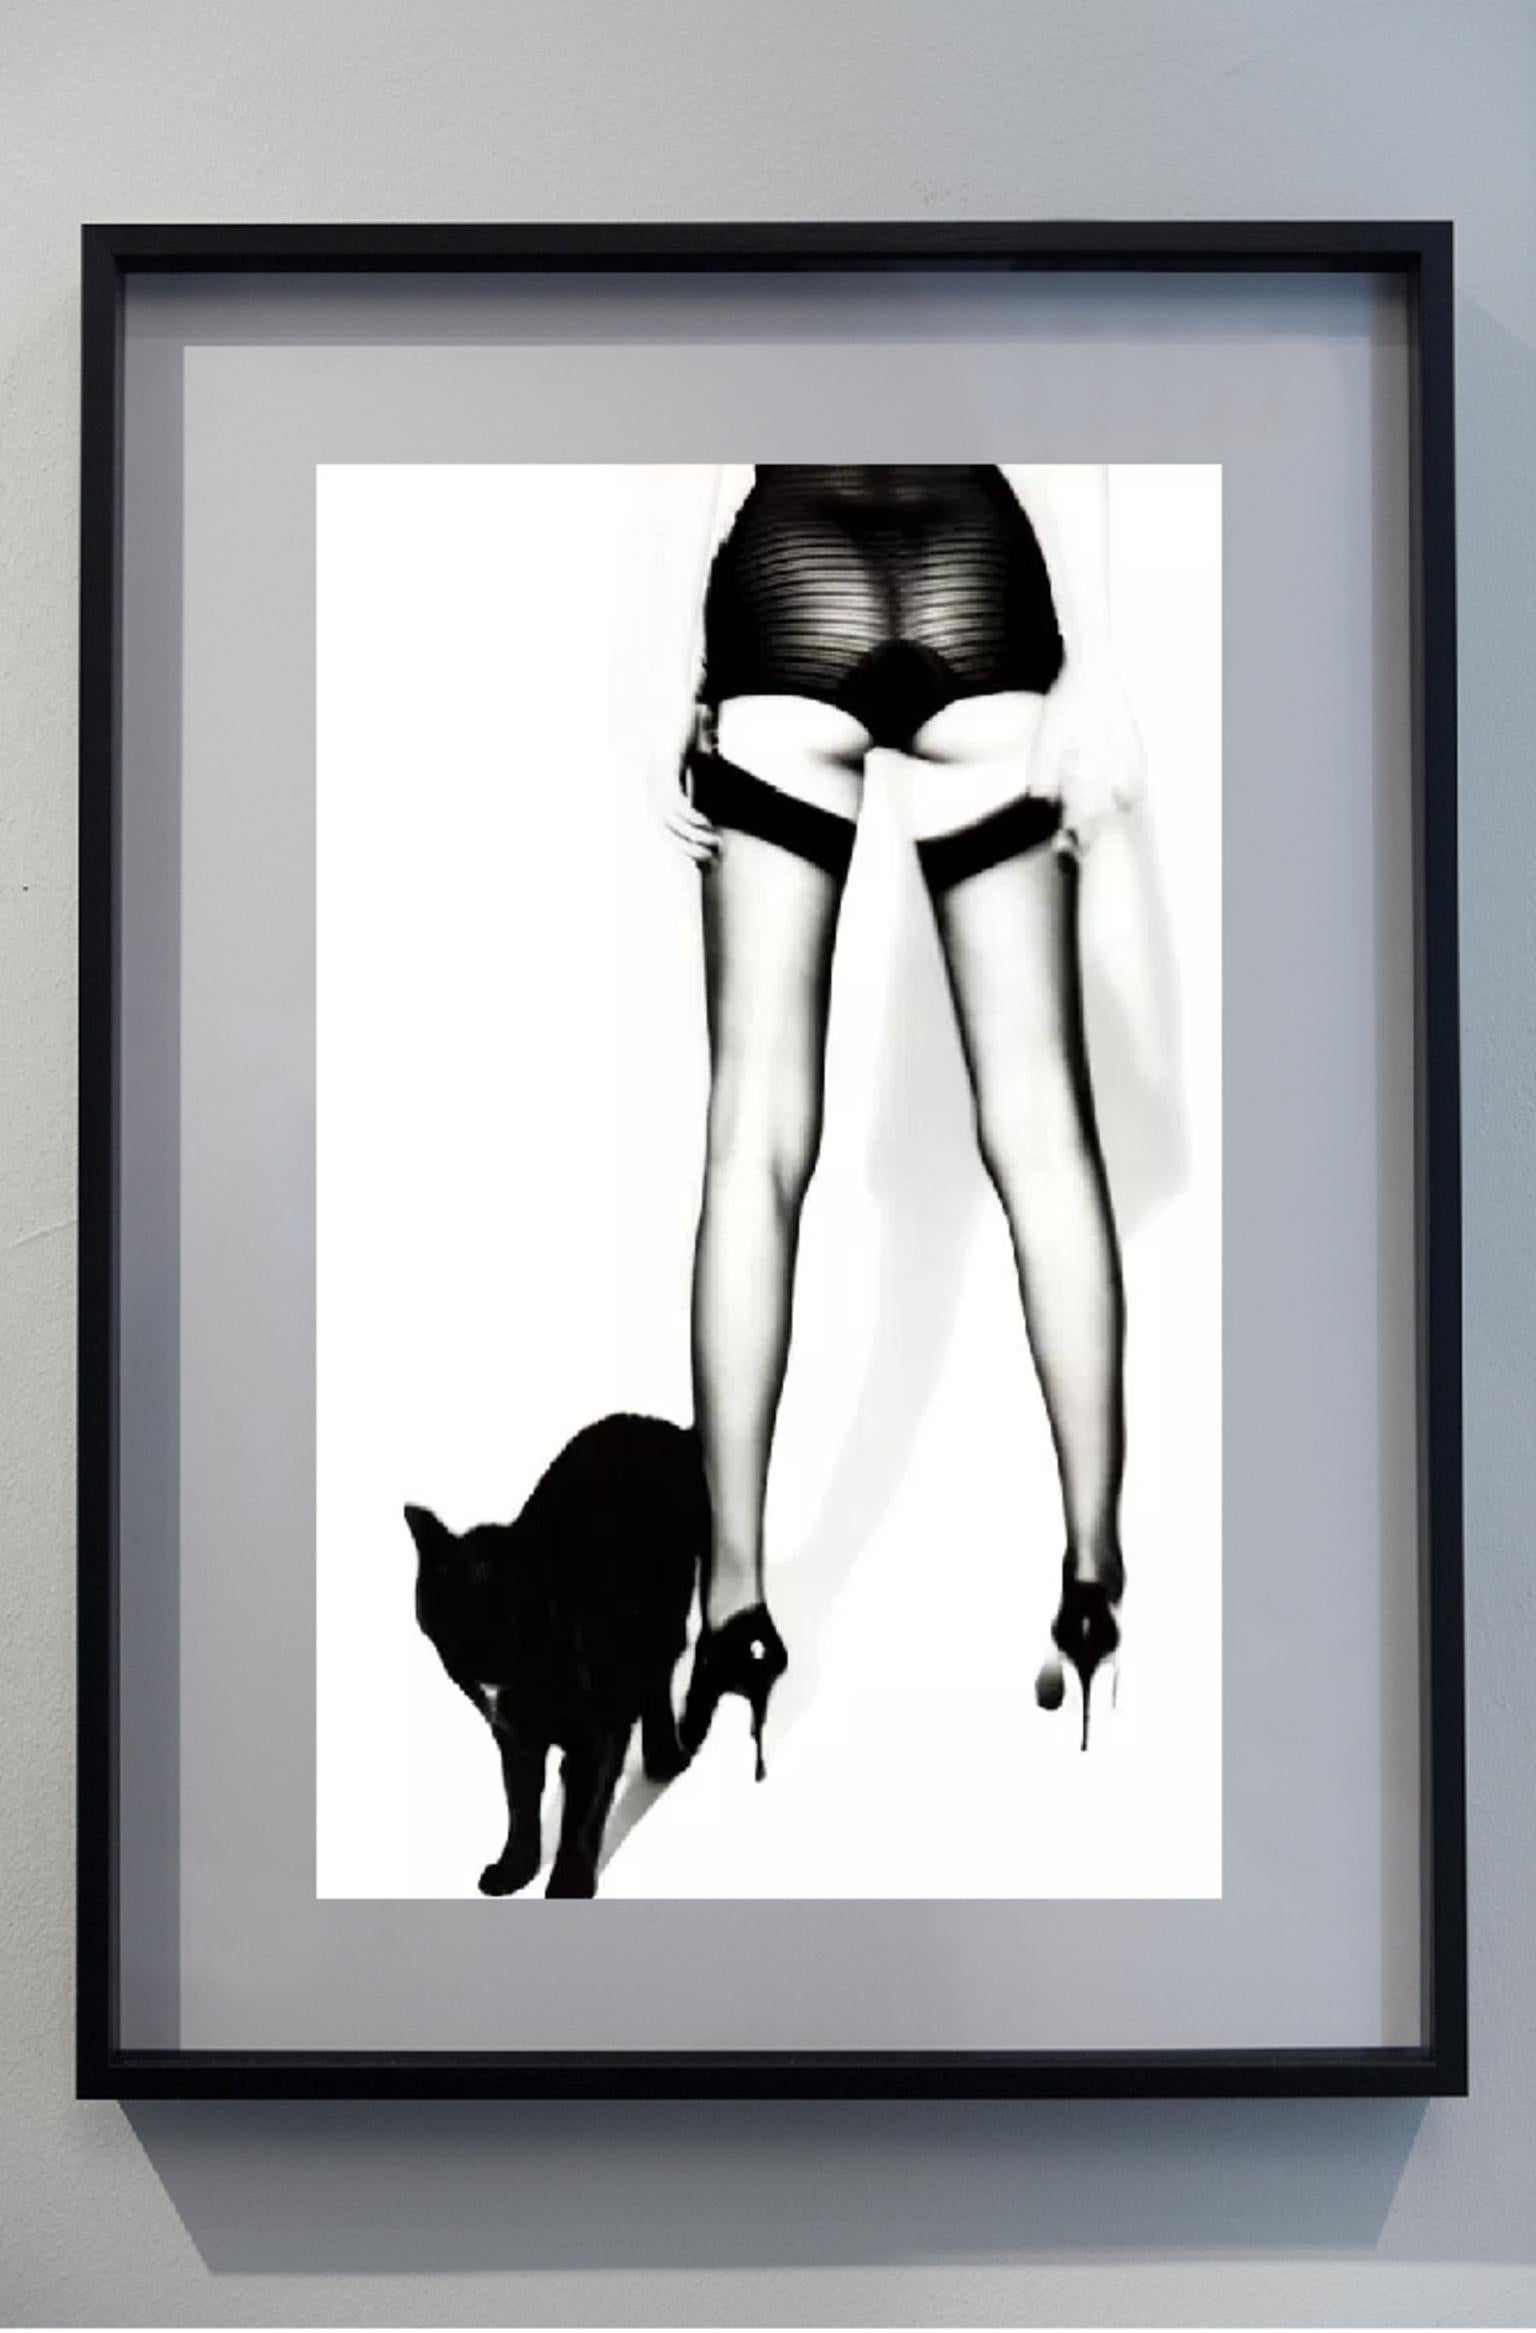 Adriana Lima Cat -  Wicked series, behind with tights and high heels - Photograph by Ellen von Unwerth